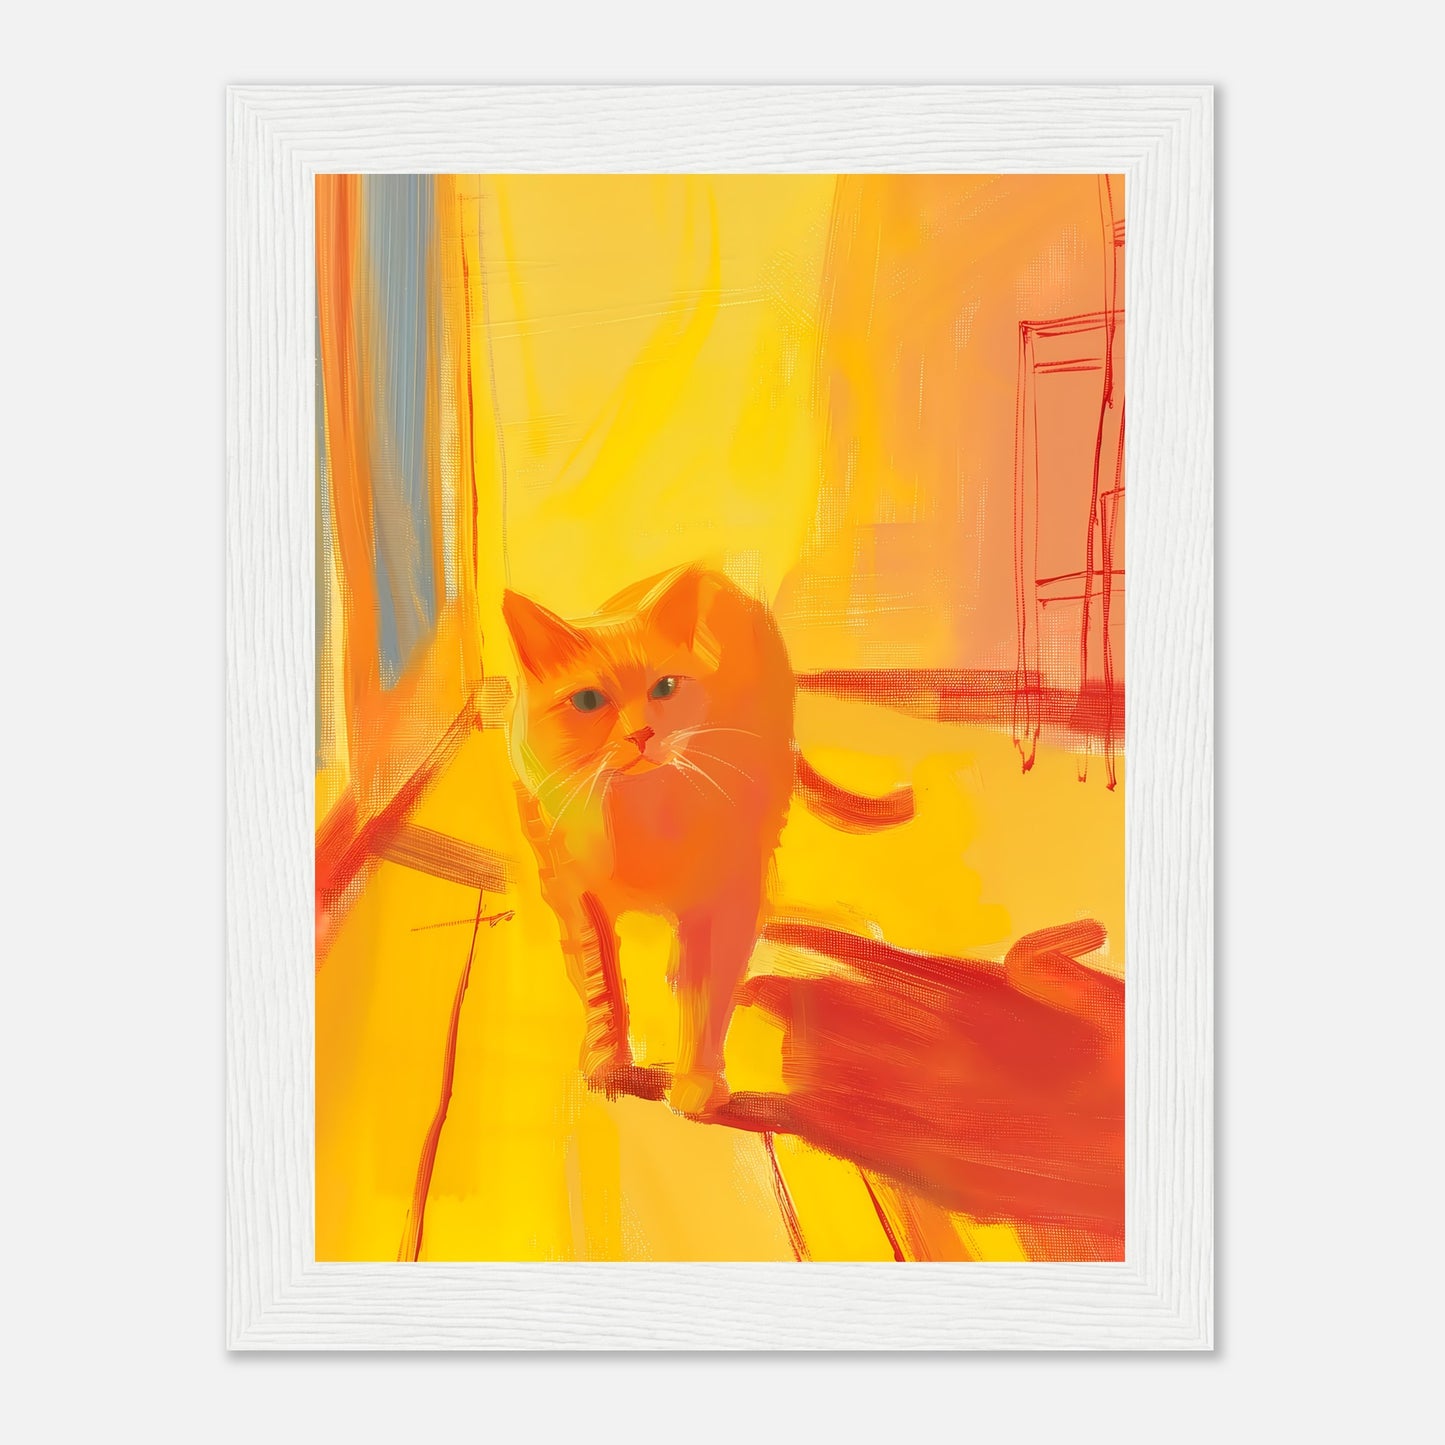 A framed abstract painting of an orange cat against a vibrant yellow and red background.